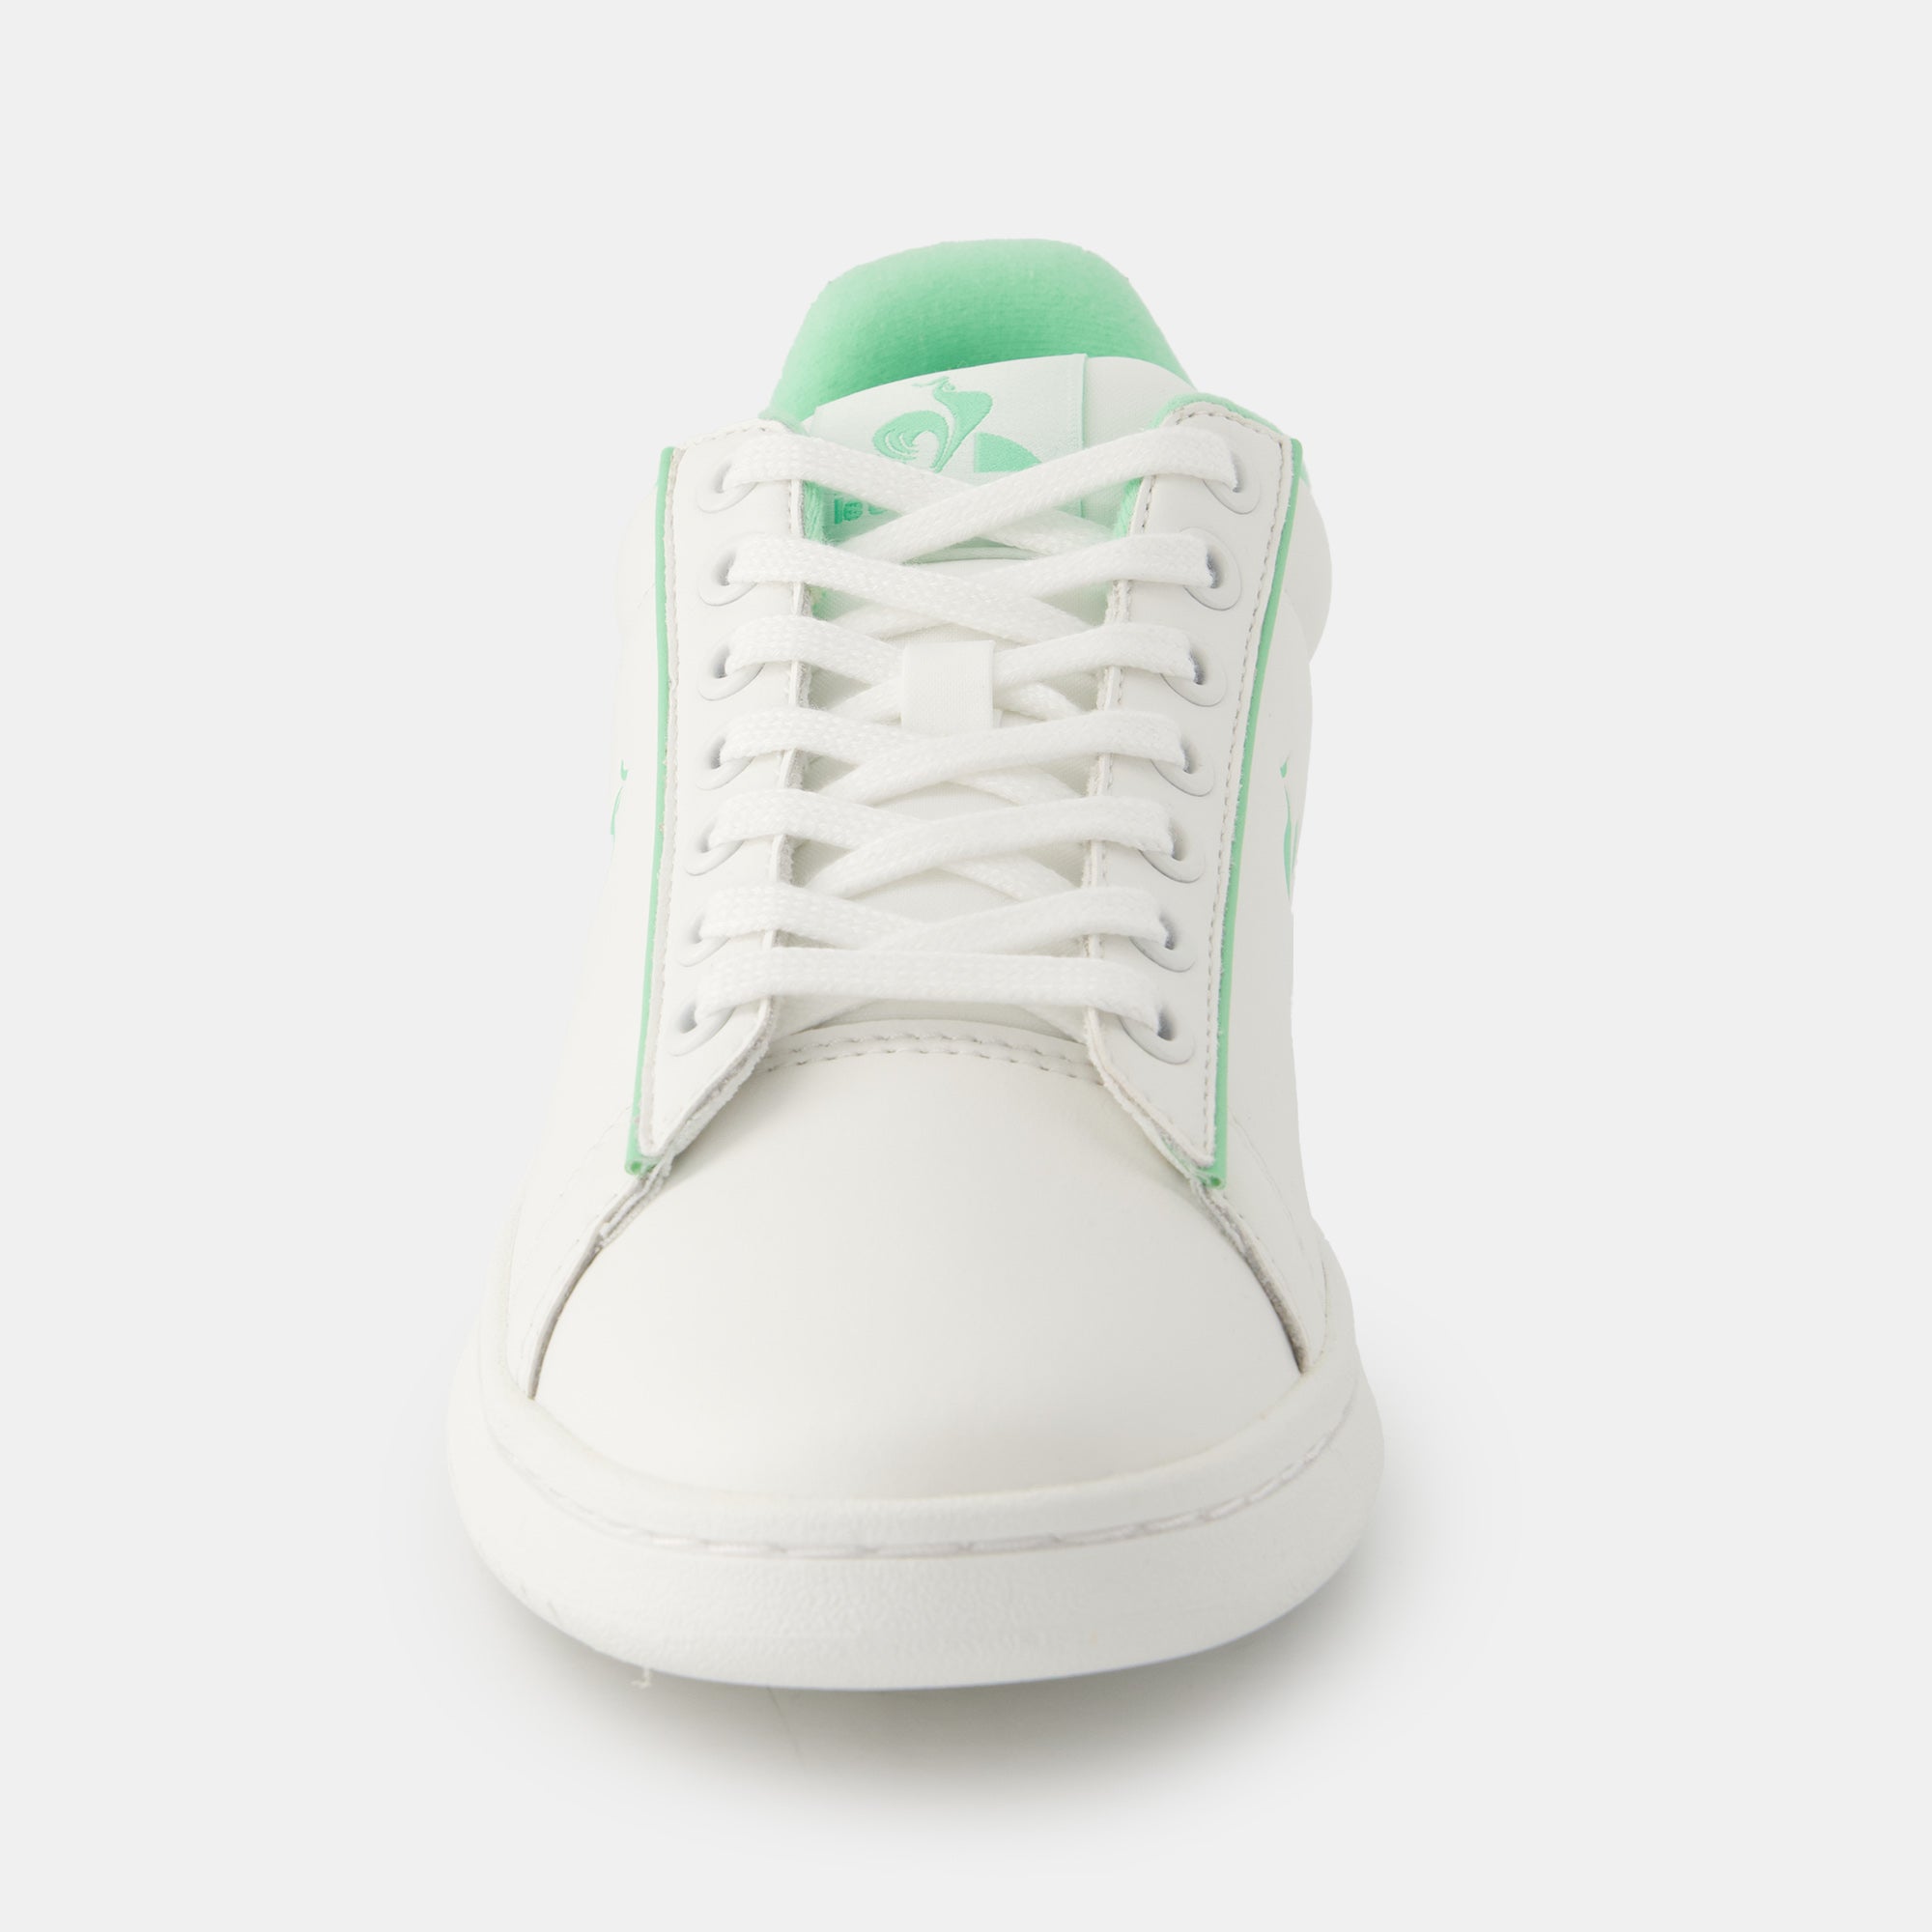 2410756-LCS COURT CLEAN W optical white/green | Chaussures LCS COURT CLEAN W Femme